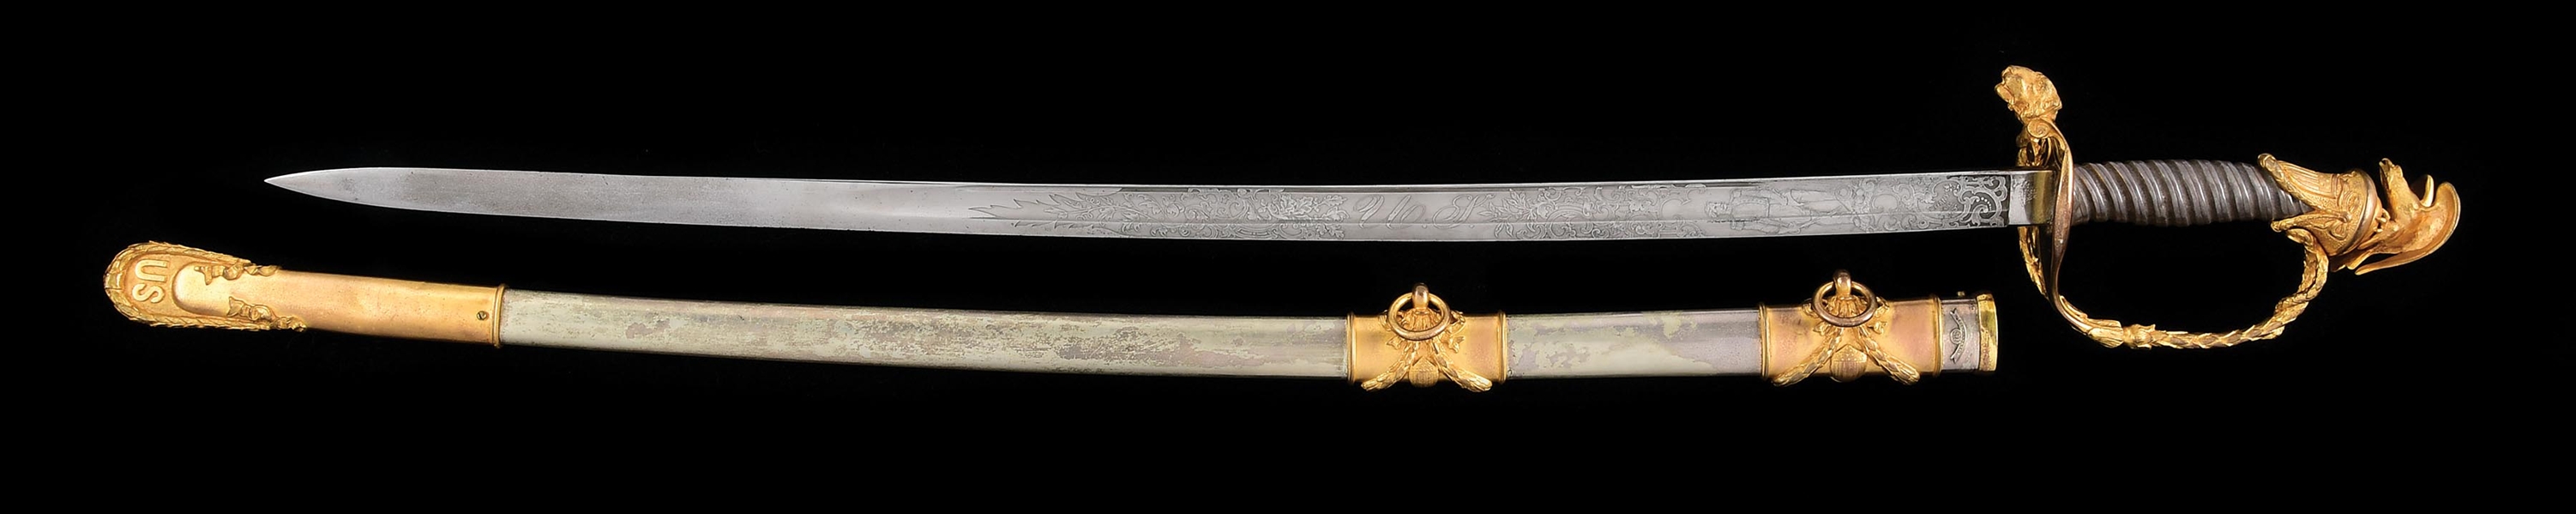 TIFFANY PRESENTATION SWORD AND CORPS BADGE OF CAPT. H.B. MASTERS